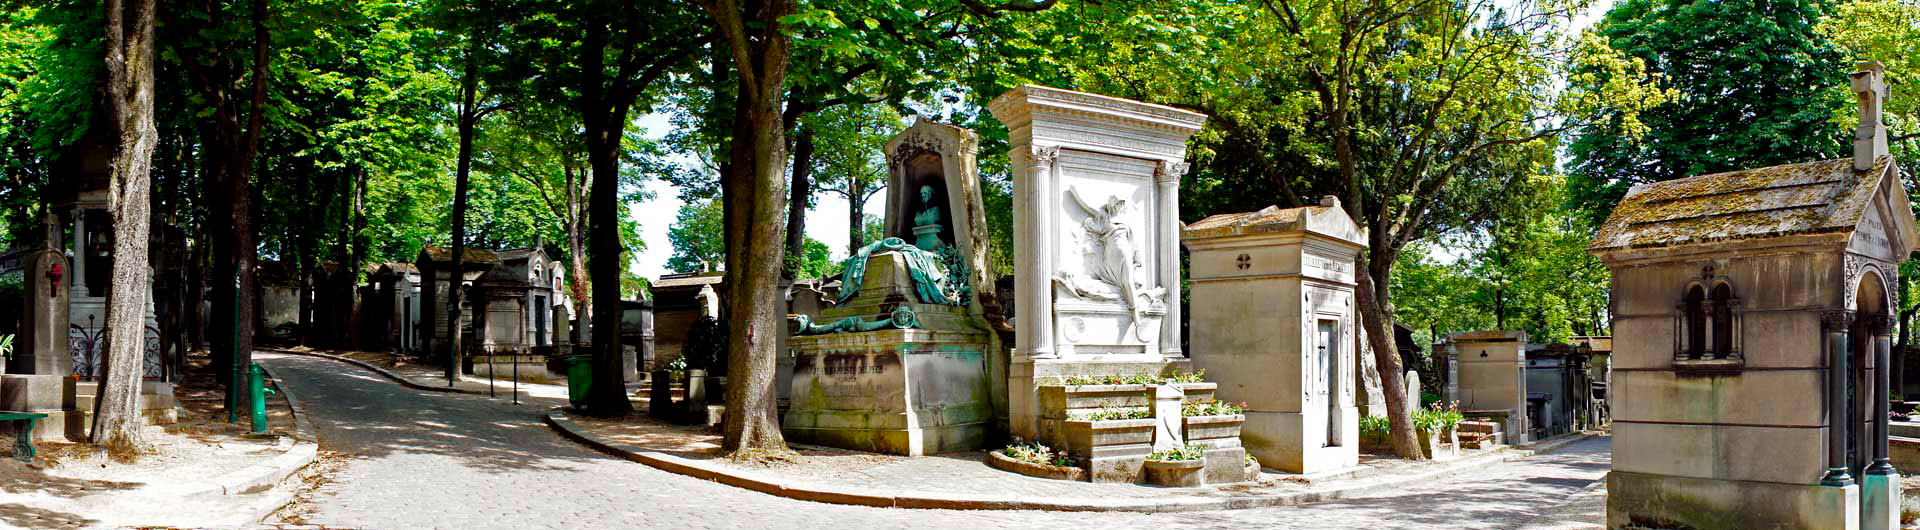 Guided tour of The Père Lachaise